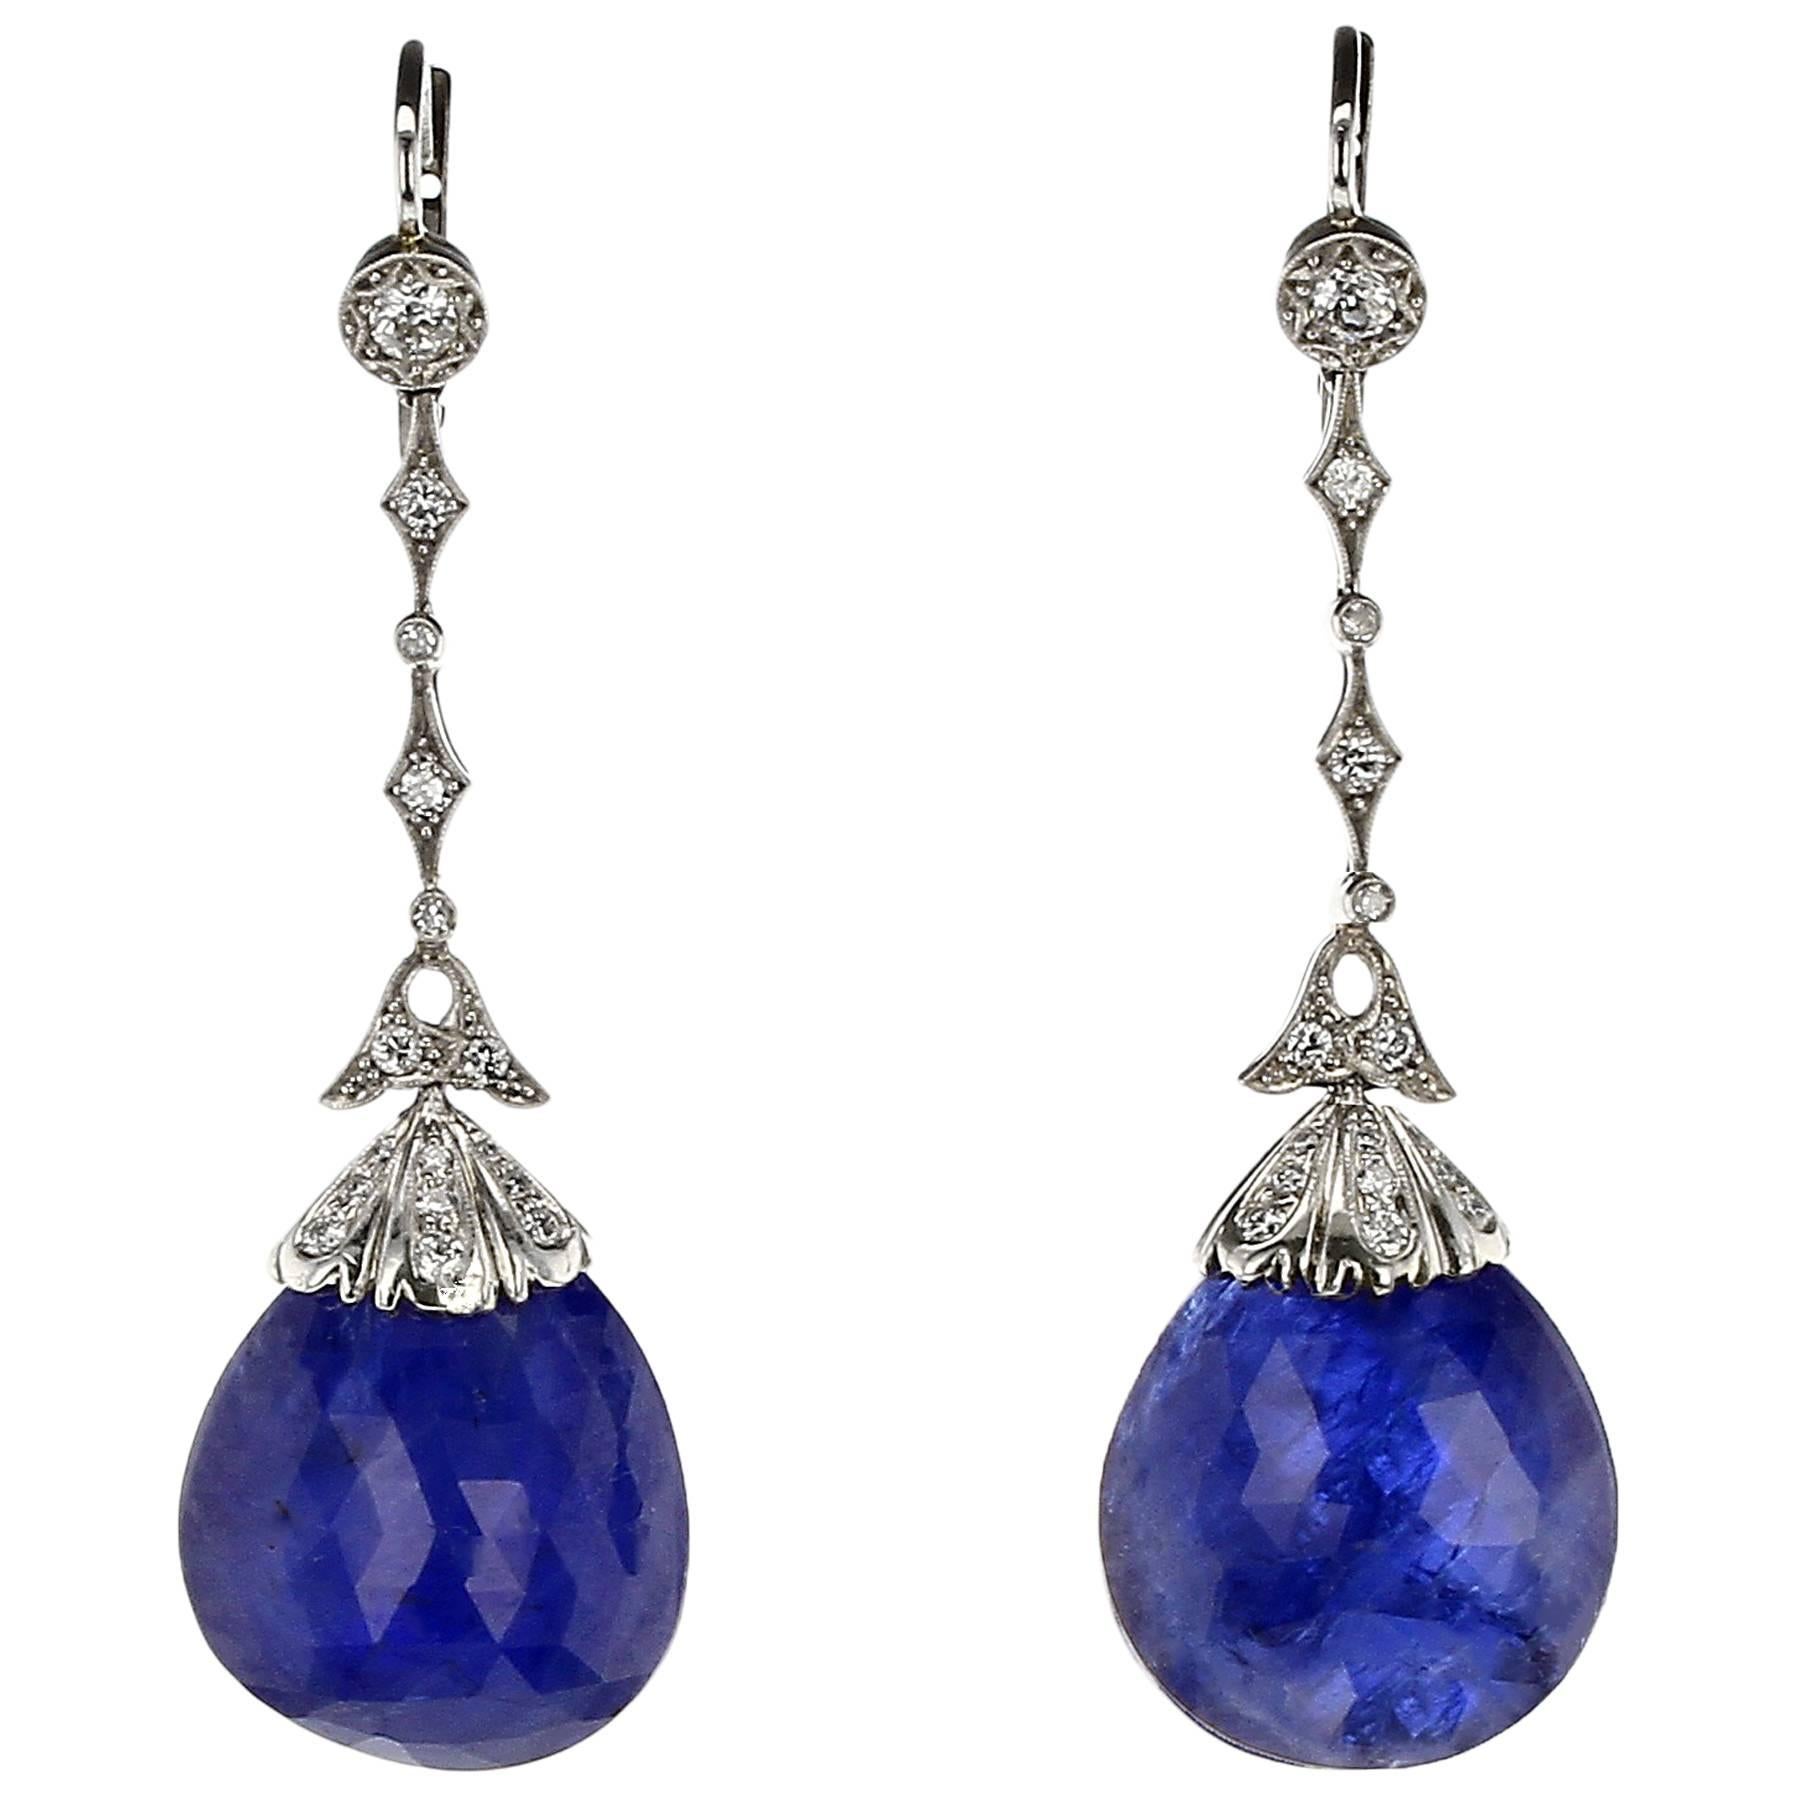 A stunning and bold pair of natural, no-heat sapphire briolette-cut drops suspended from a diamond-studded cap and mounting with alternating star shape and round bezel-set diamonds, with milgrain work. The two sapphires weigh an approximately